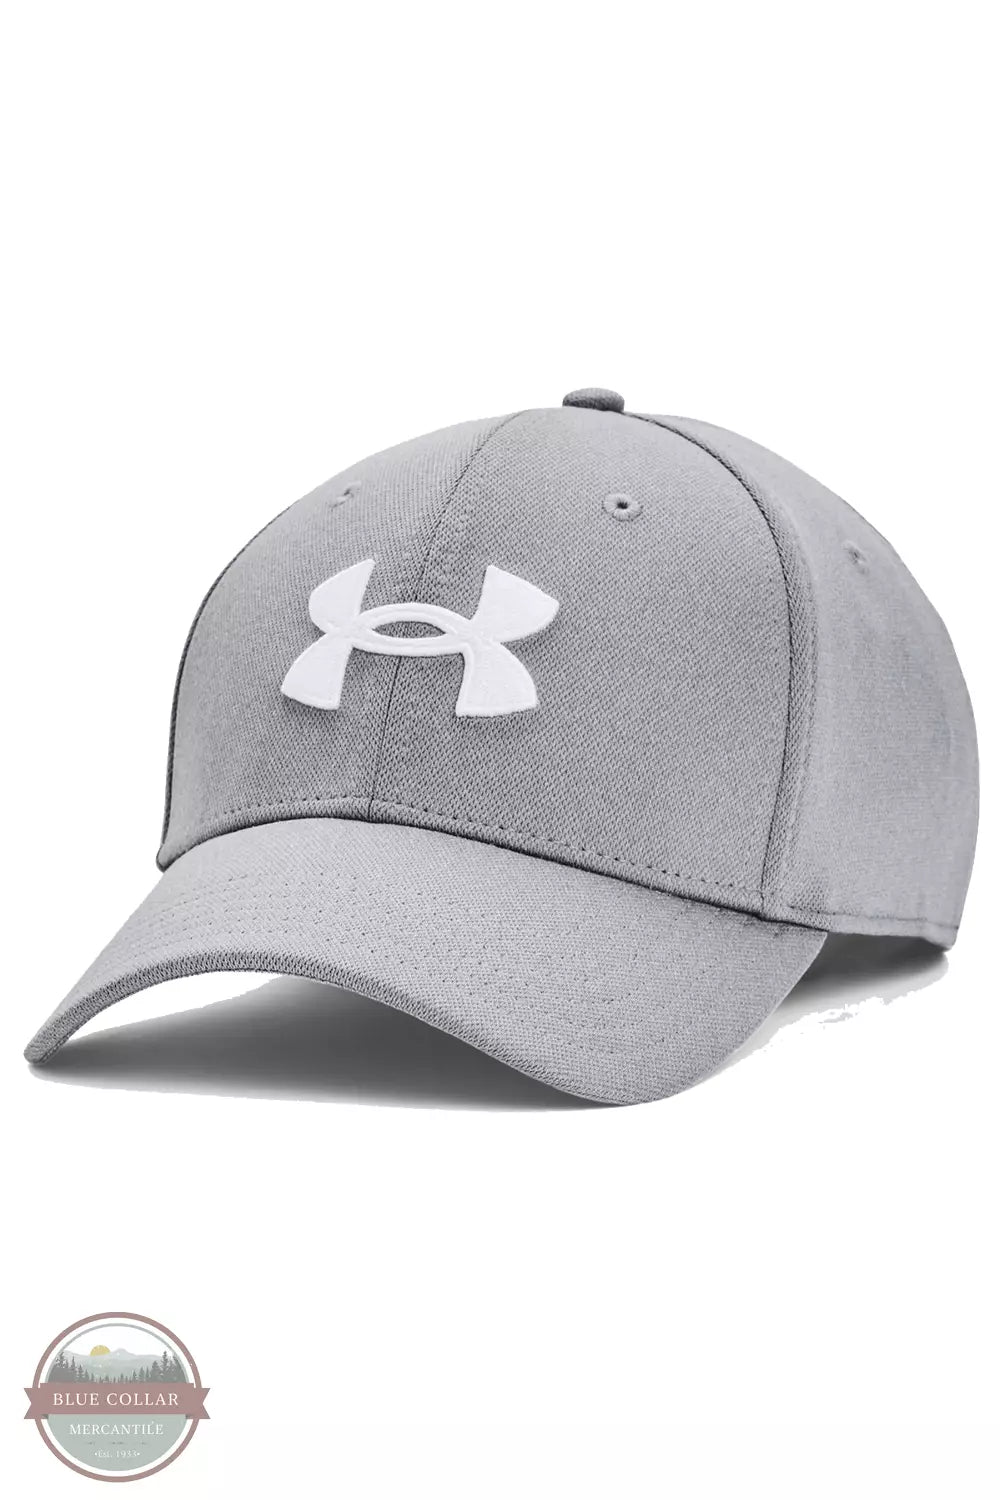 Under Armour 1376700 Blitzing Cap Steel / White Front View